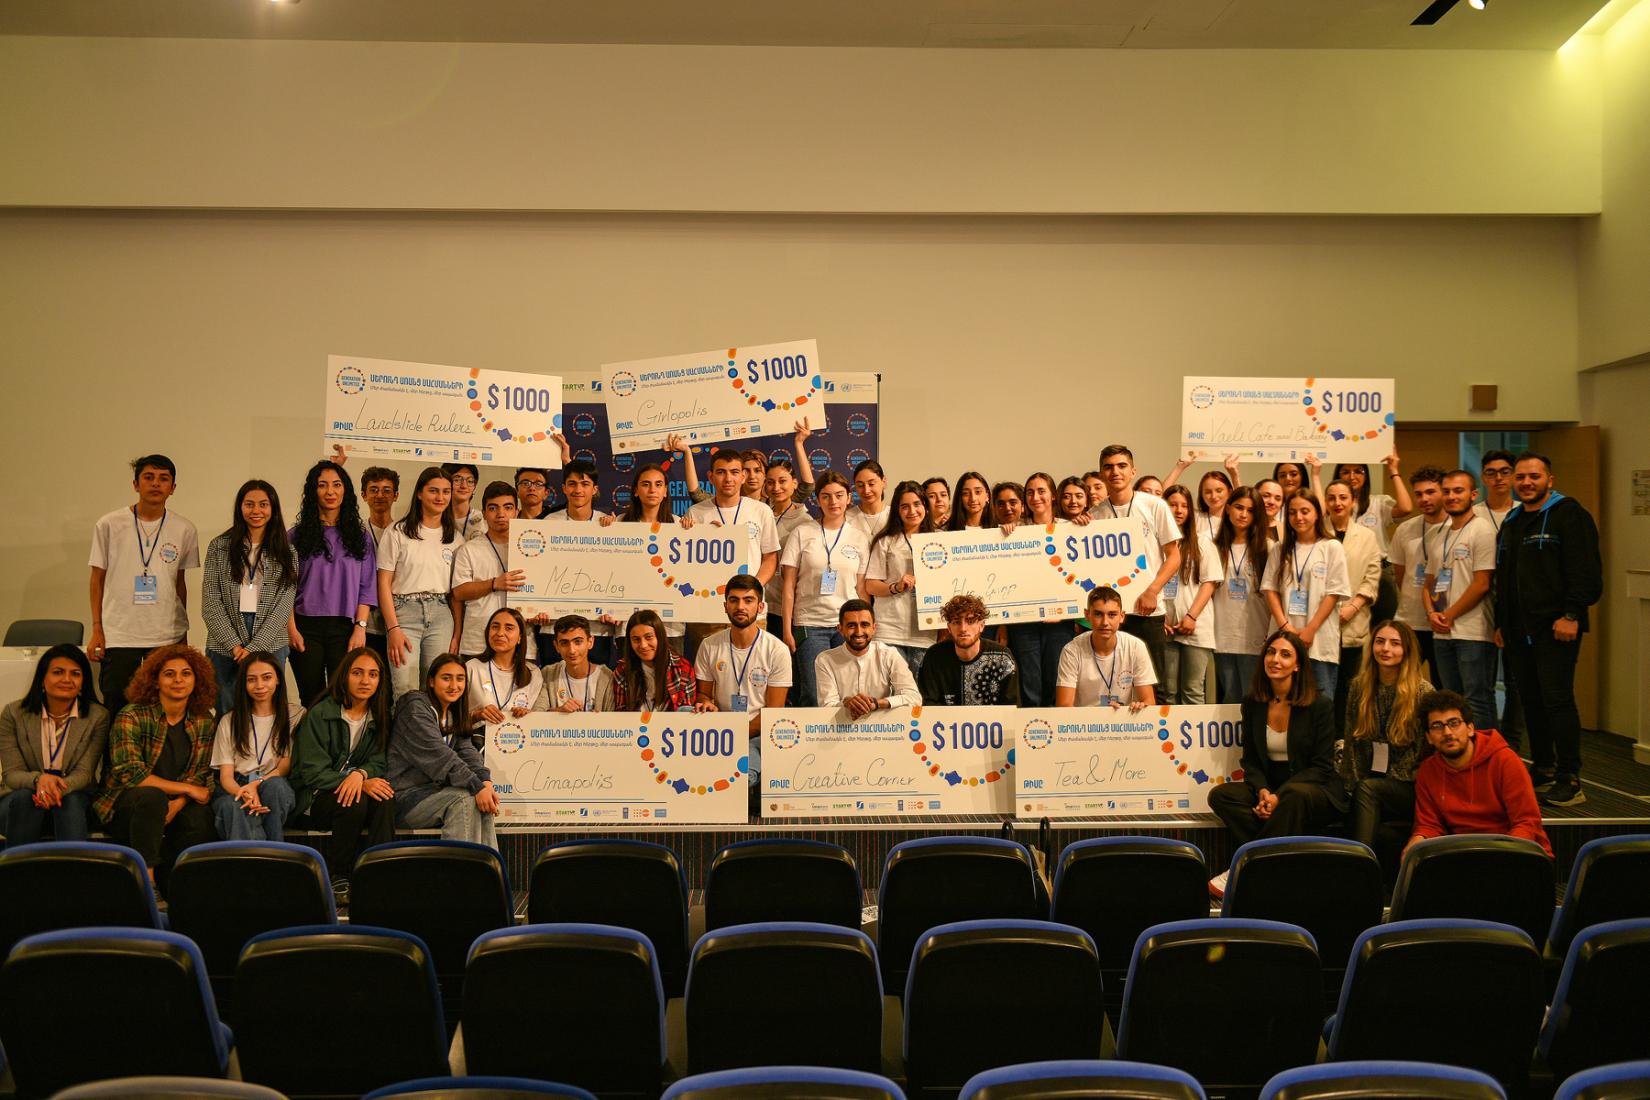 Lots of happy Armenian startup teams of adolescents on the stage holding their prize.